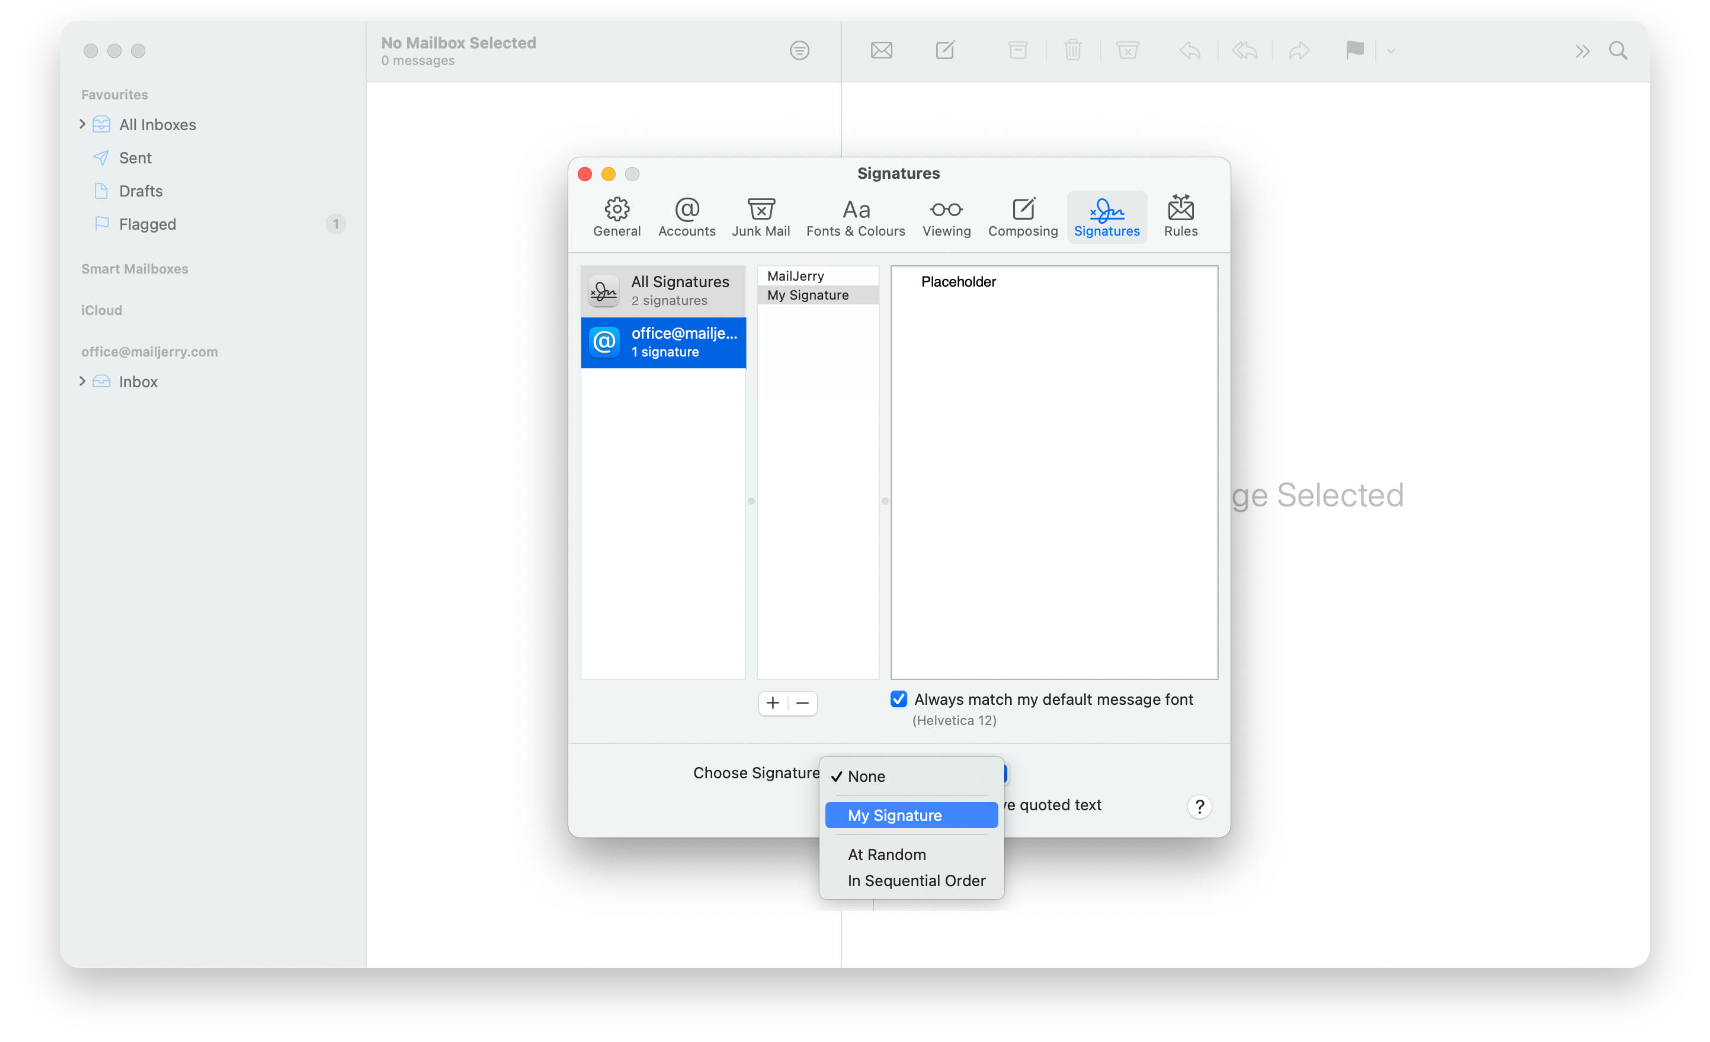 Select your new signature in Apple Mail